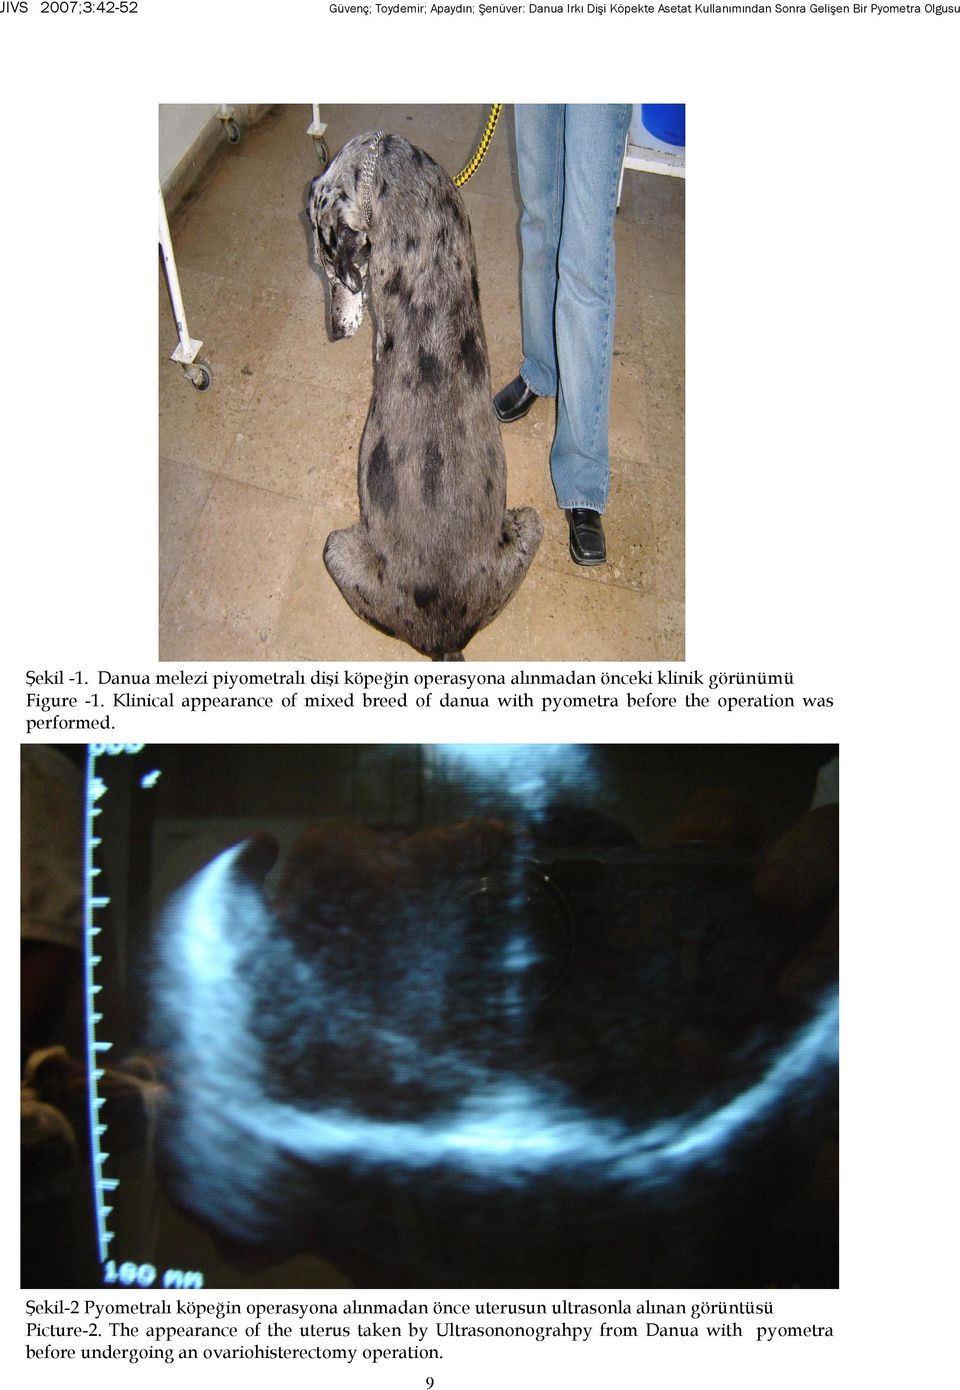 Klinical appearance of mixed breed of danua with pyometra before the operation was performed.